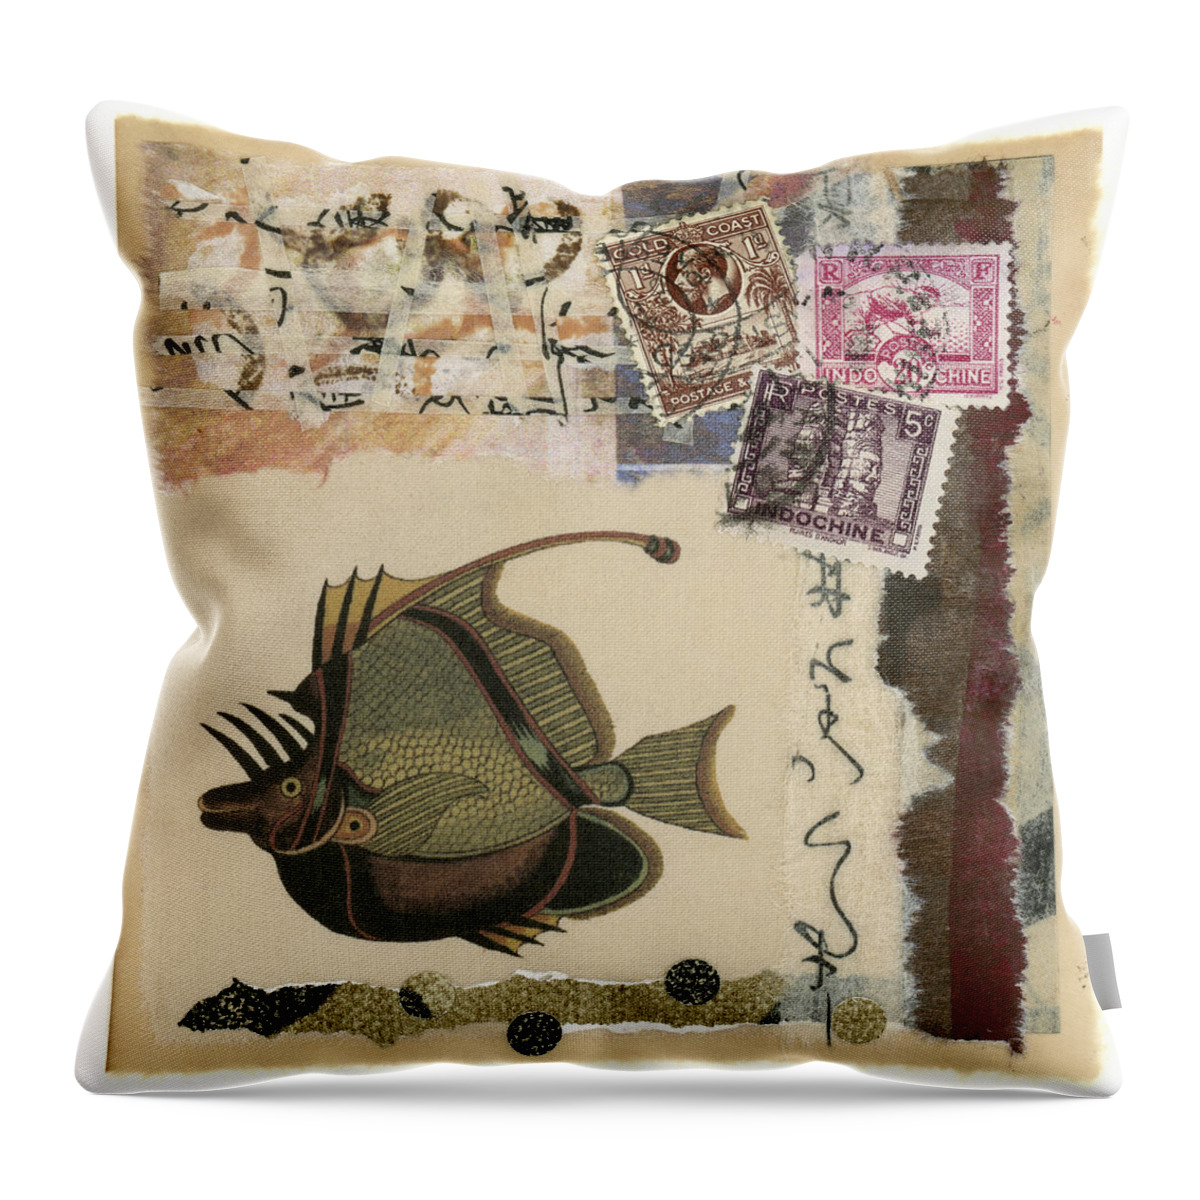 Collage Throw Pillow featuring the photograph Tropical Fish Collage by Carol Leigh